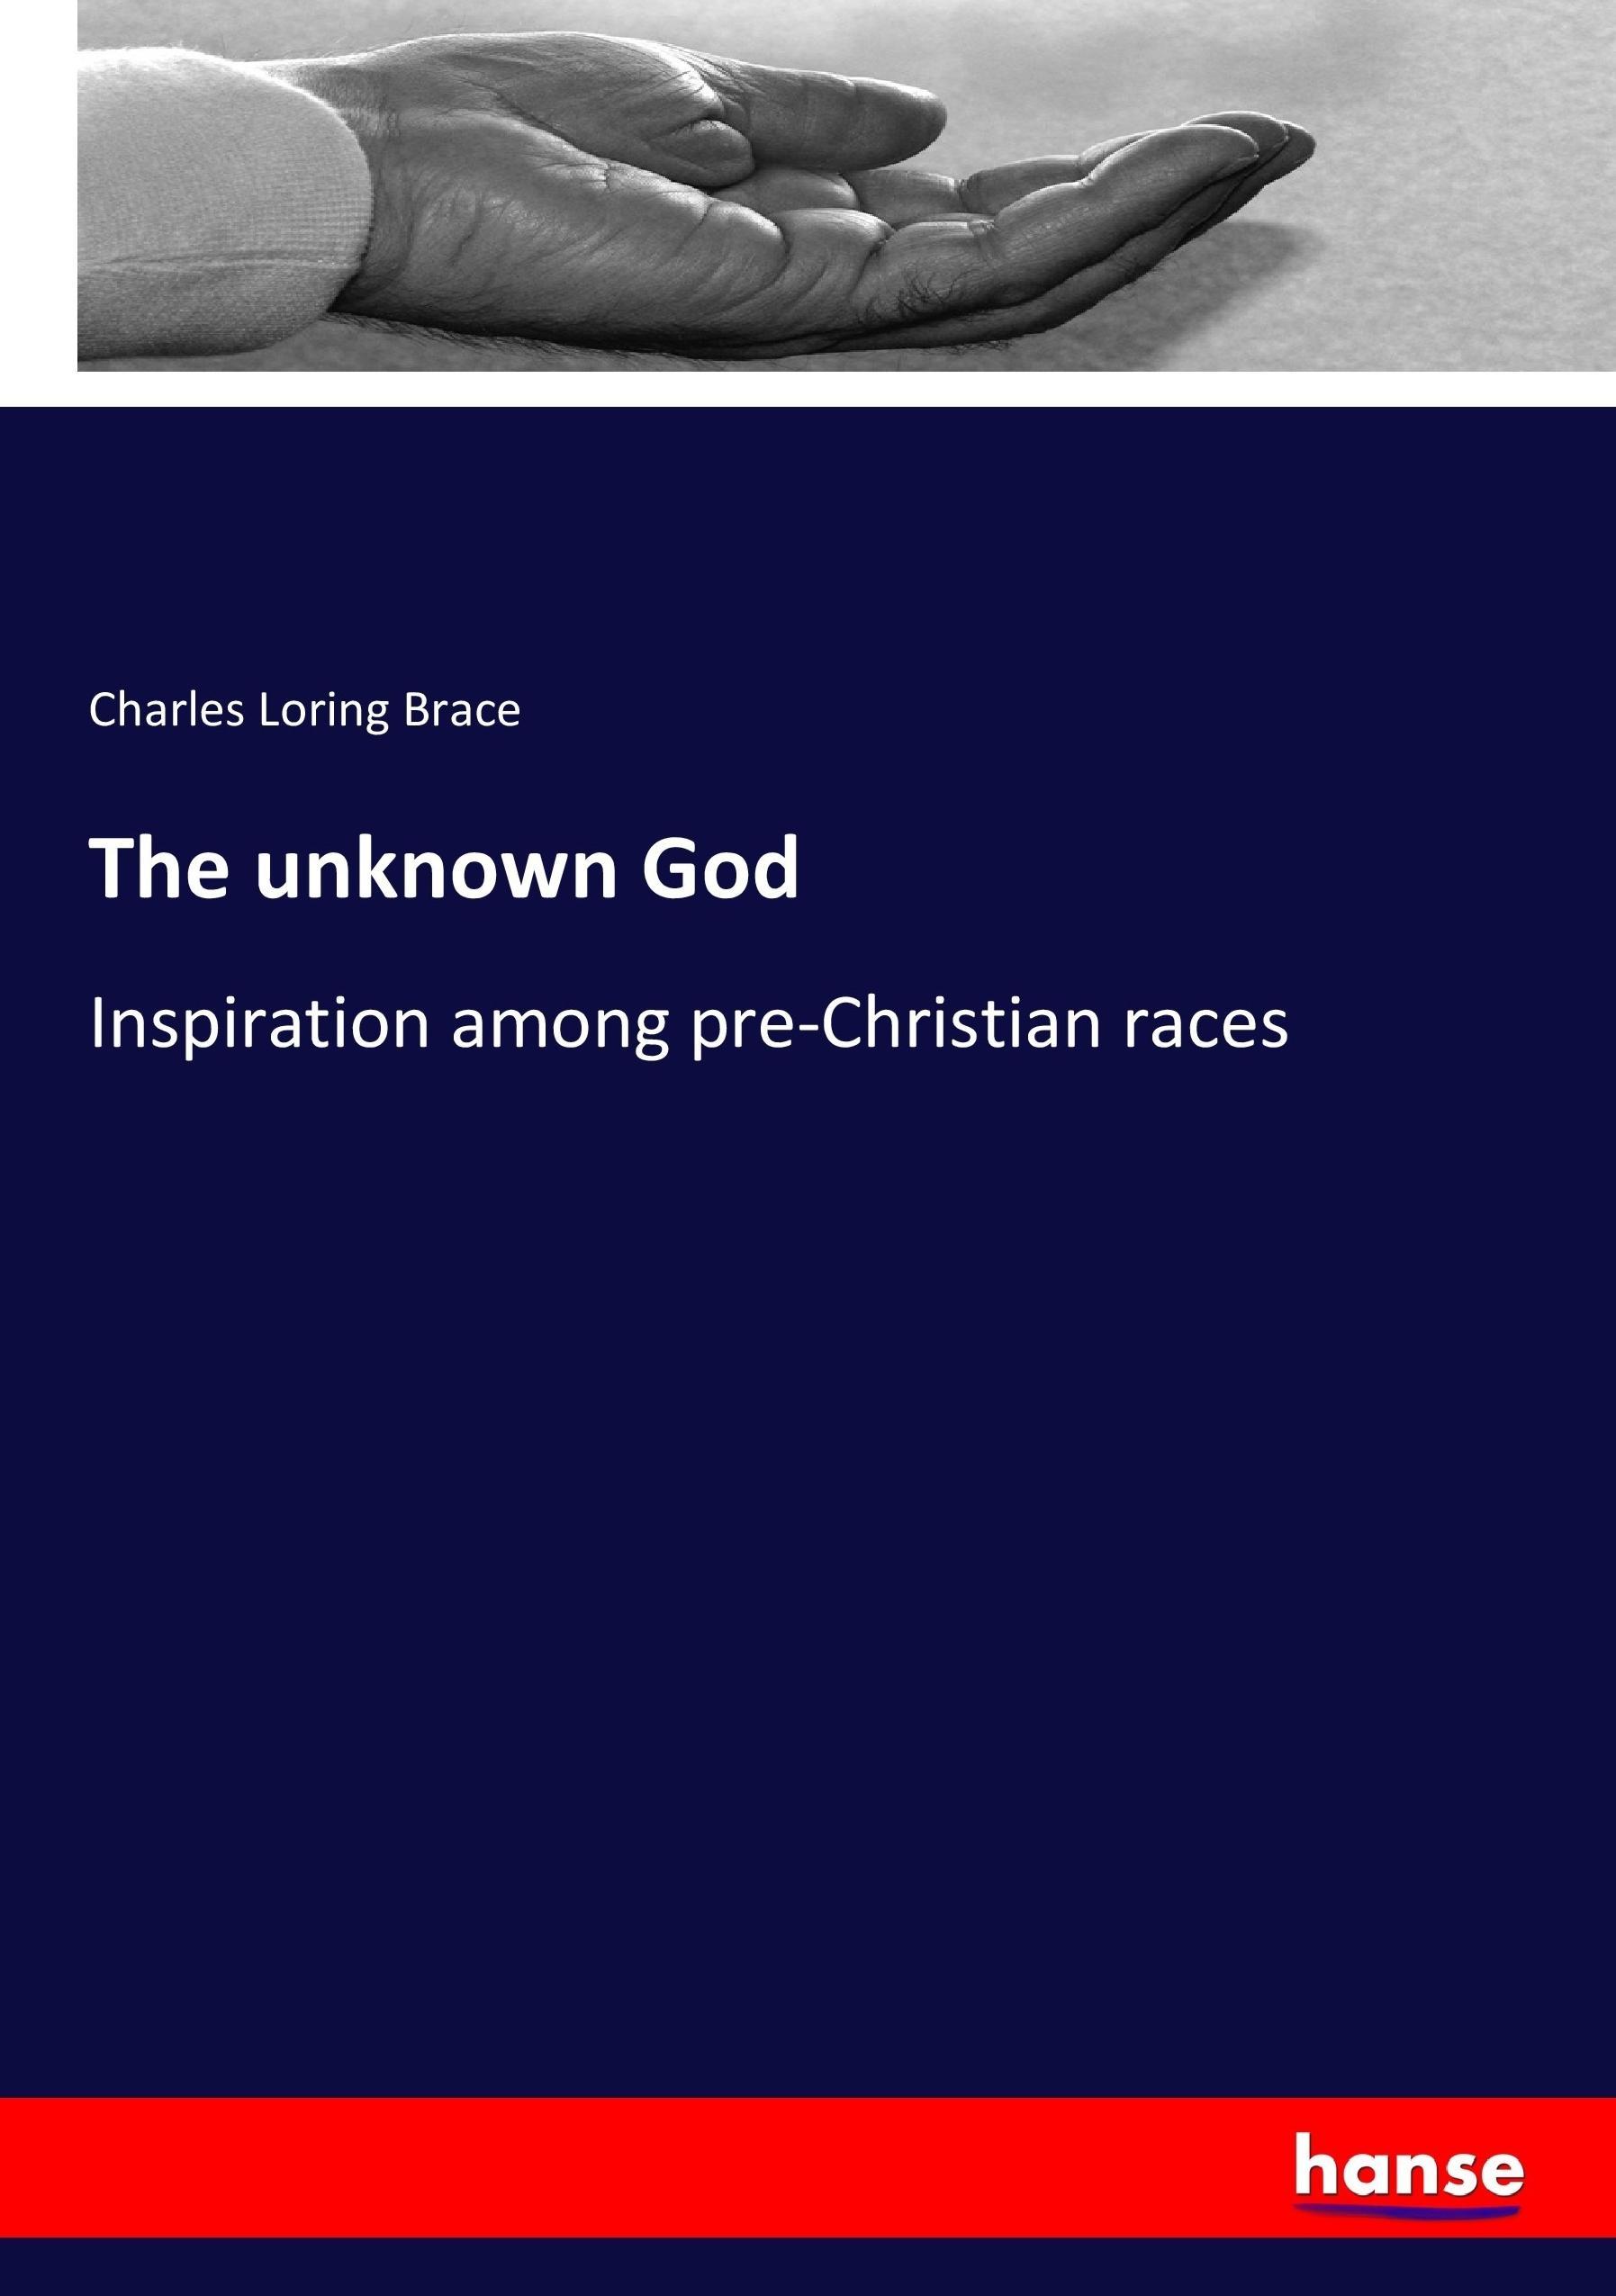 The unknown God - Brace, Charles Loring